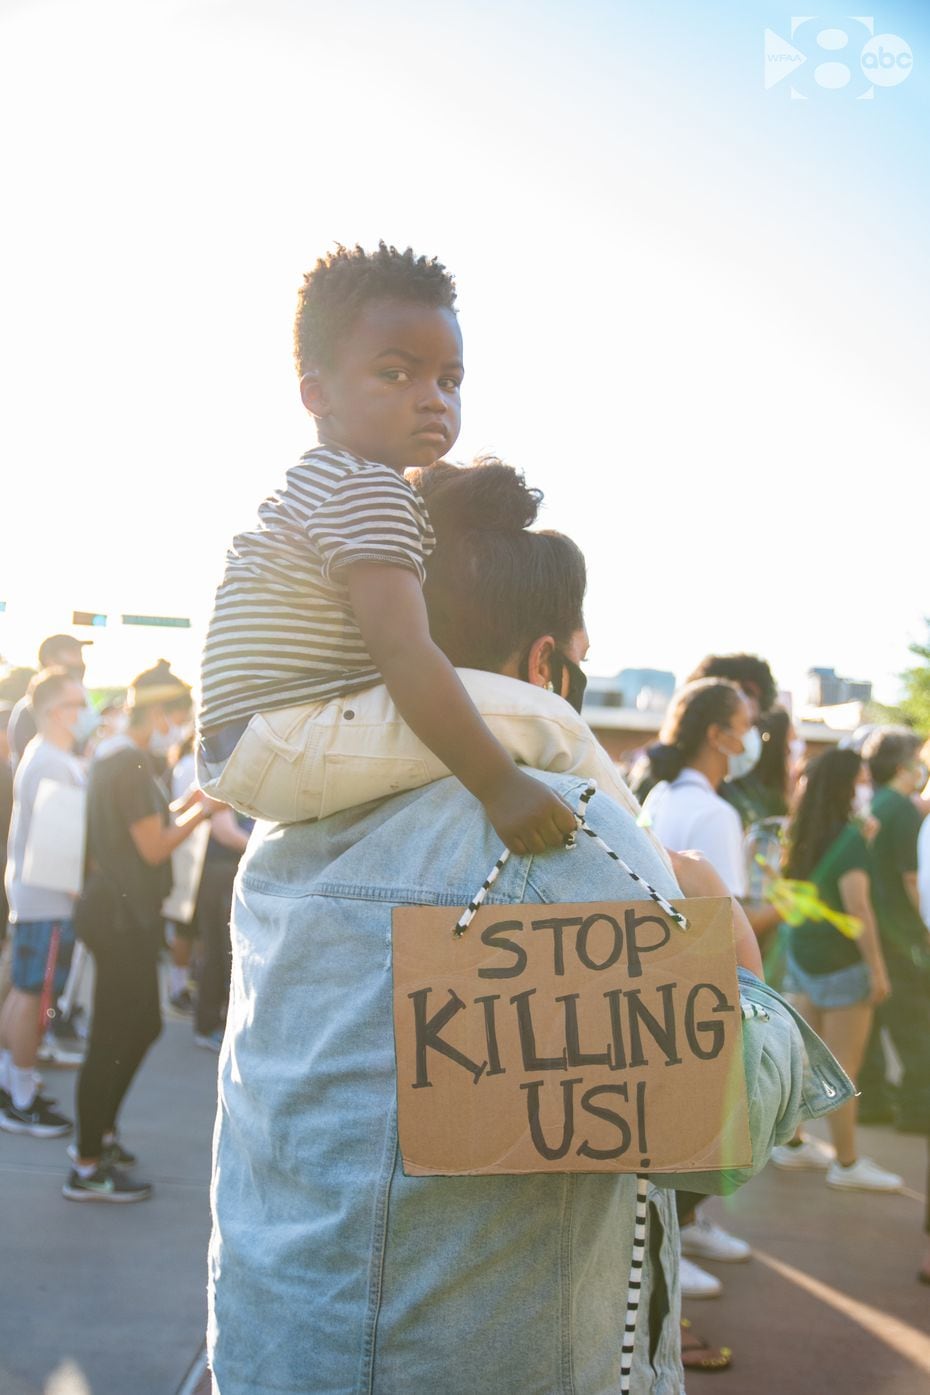 Jantzen Verastique and her son Jonah, 3, demonstrating outside Dallas police headquarters on May 29.